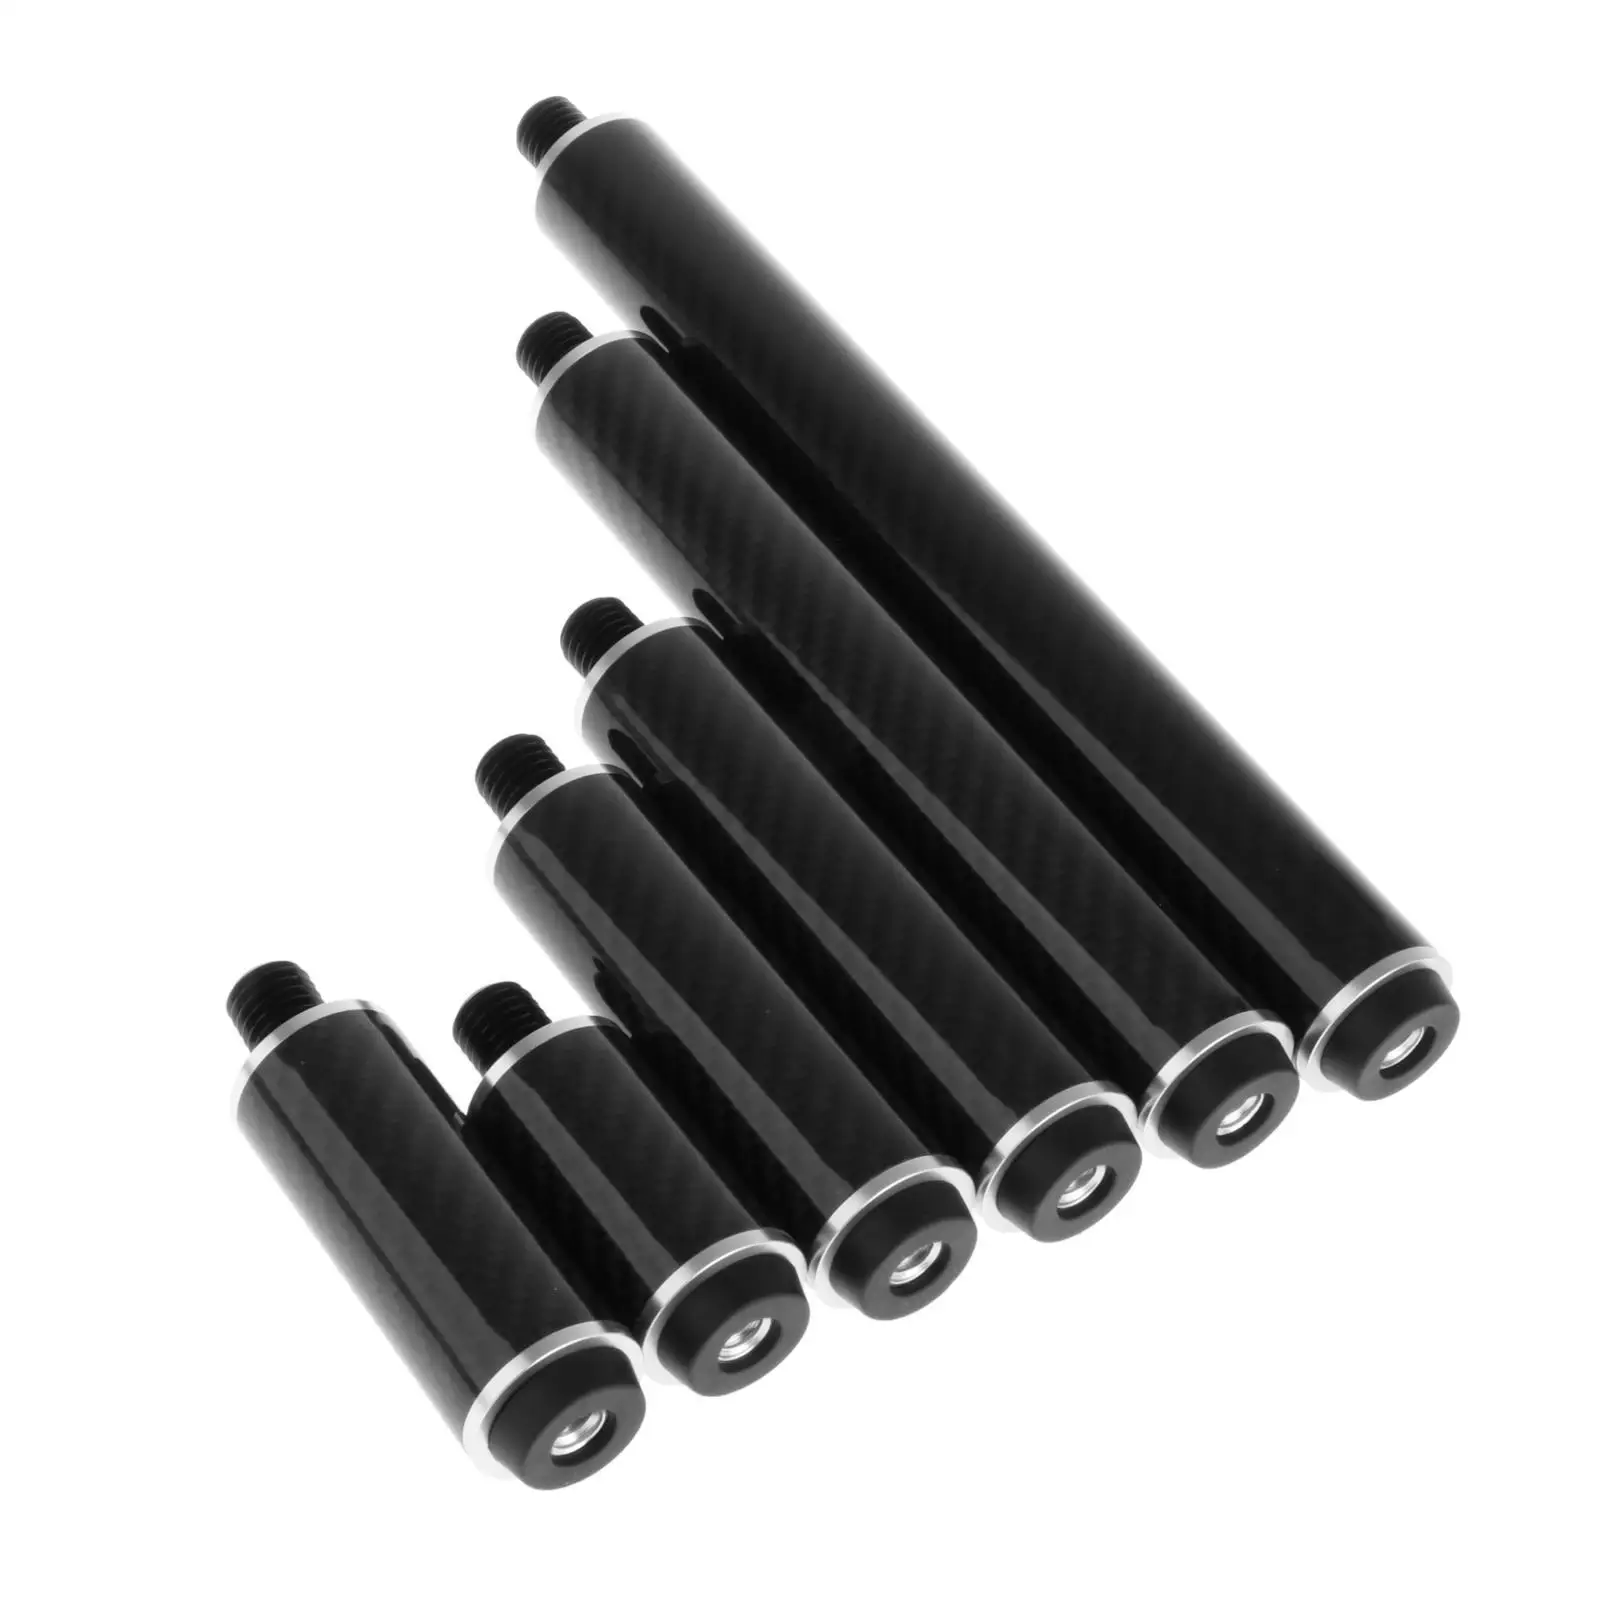 Cue End Extender Adapter Pool Cue Weight Screw Carbon Fiber Billiards Pool Cue Extension Snooker Cue Stick for Entertainment